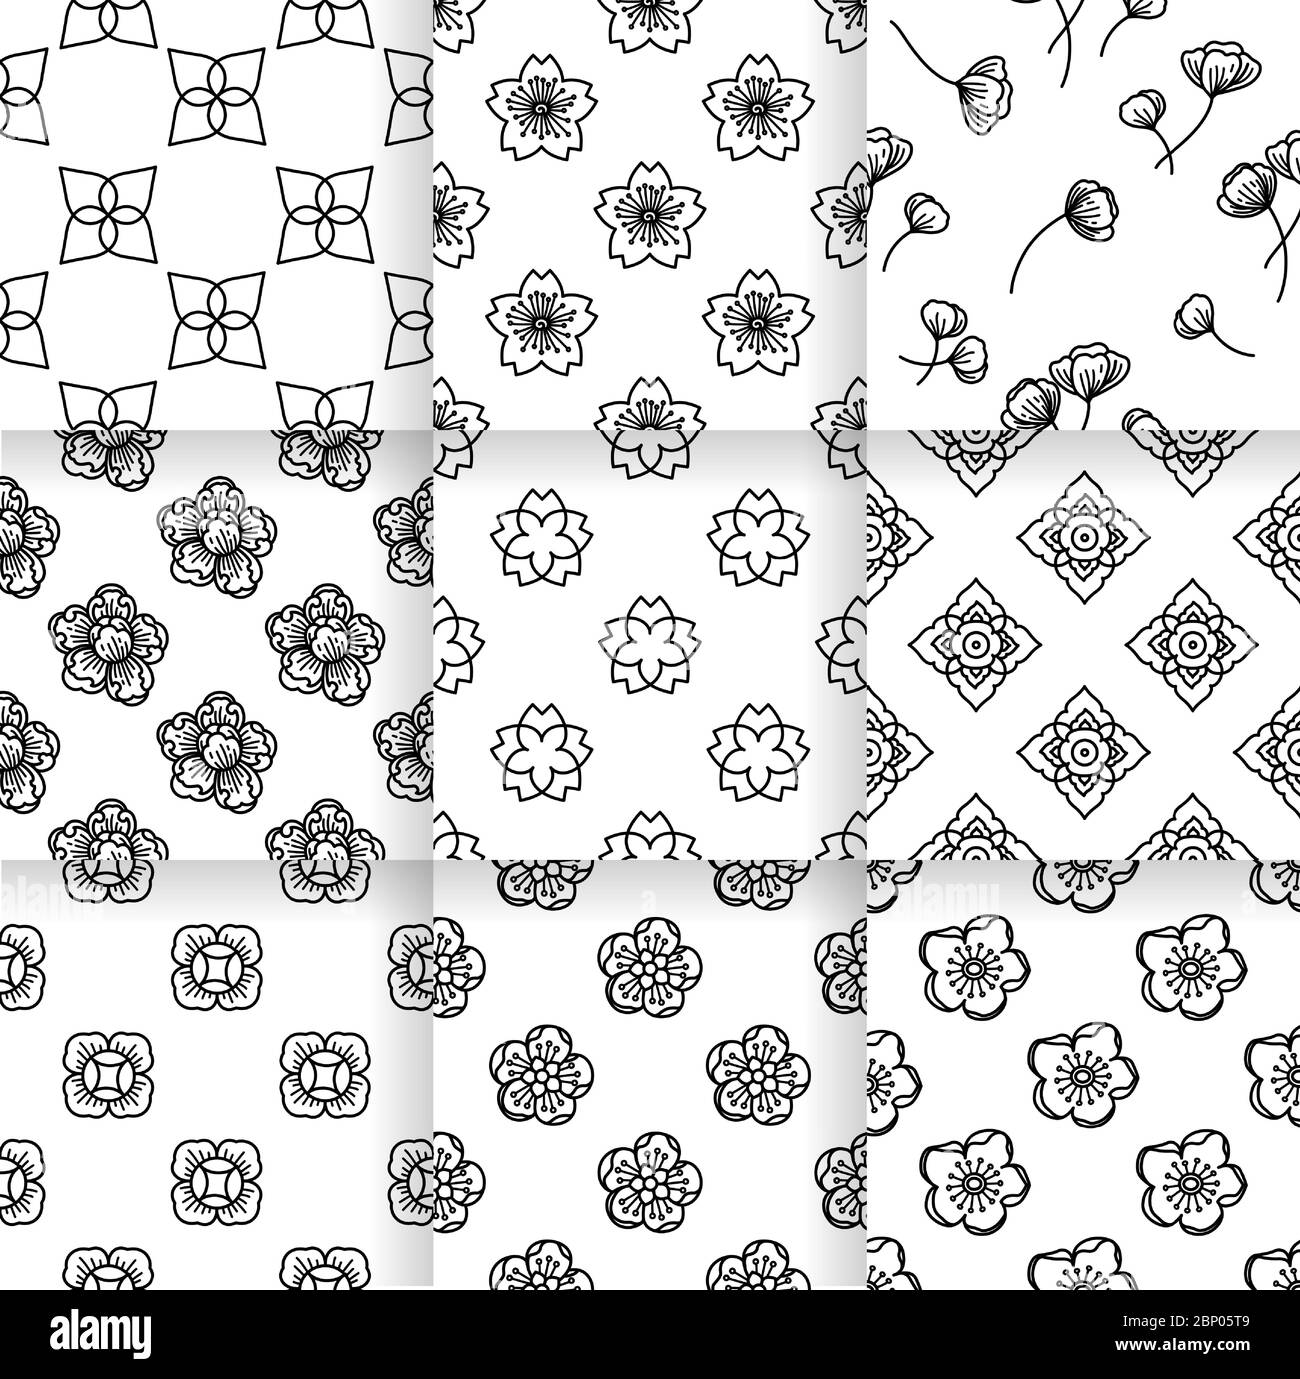 Flower seamless pattern. Floral symbol and clip art for wallpaper. Thai. Japanese. Editable. Stock Vector